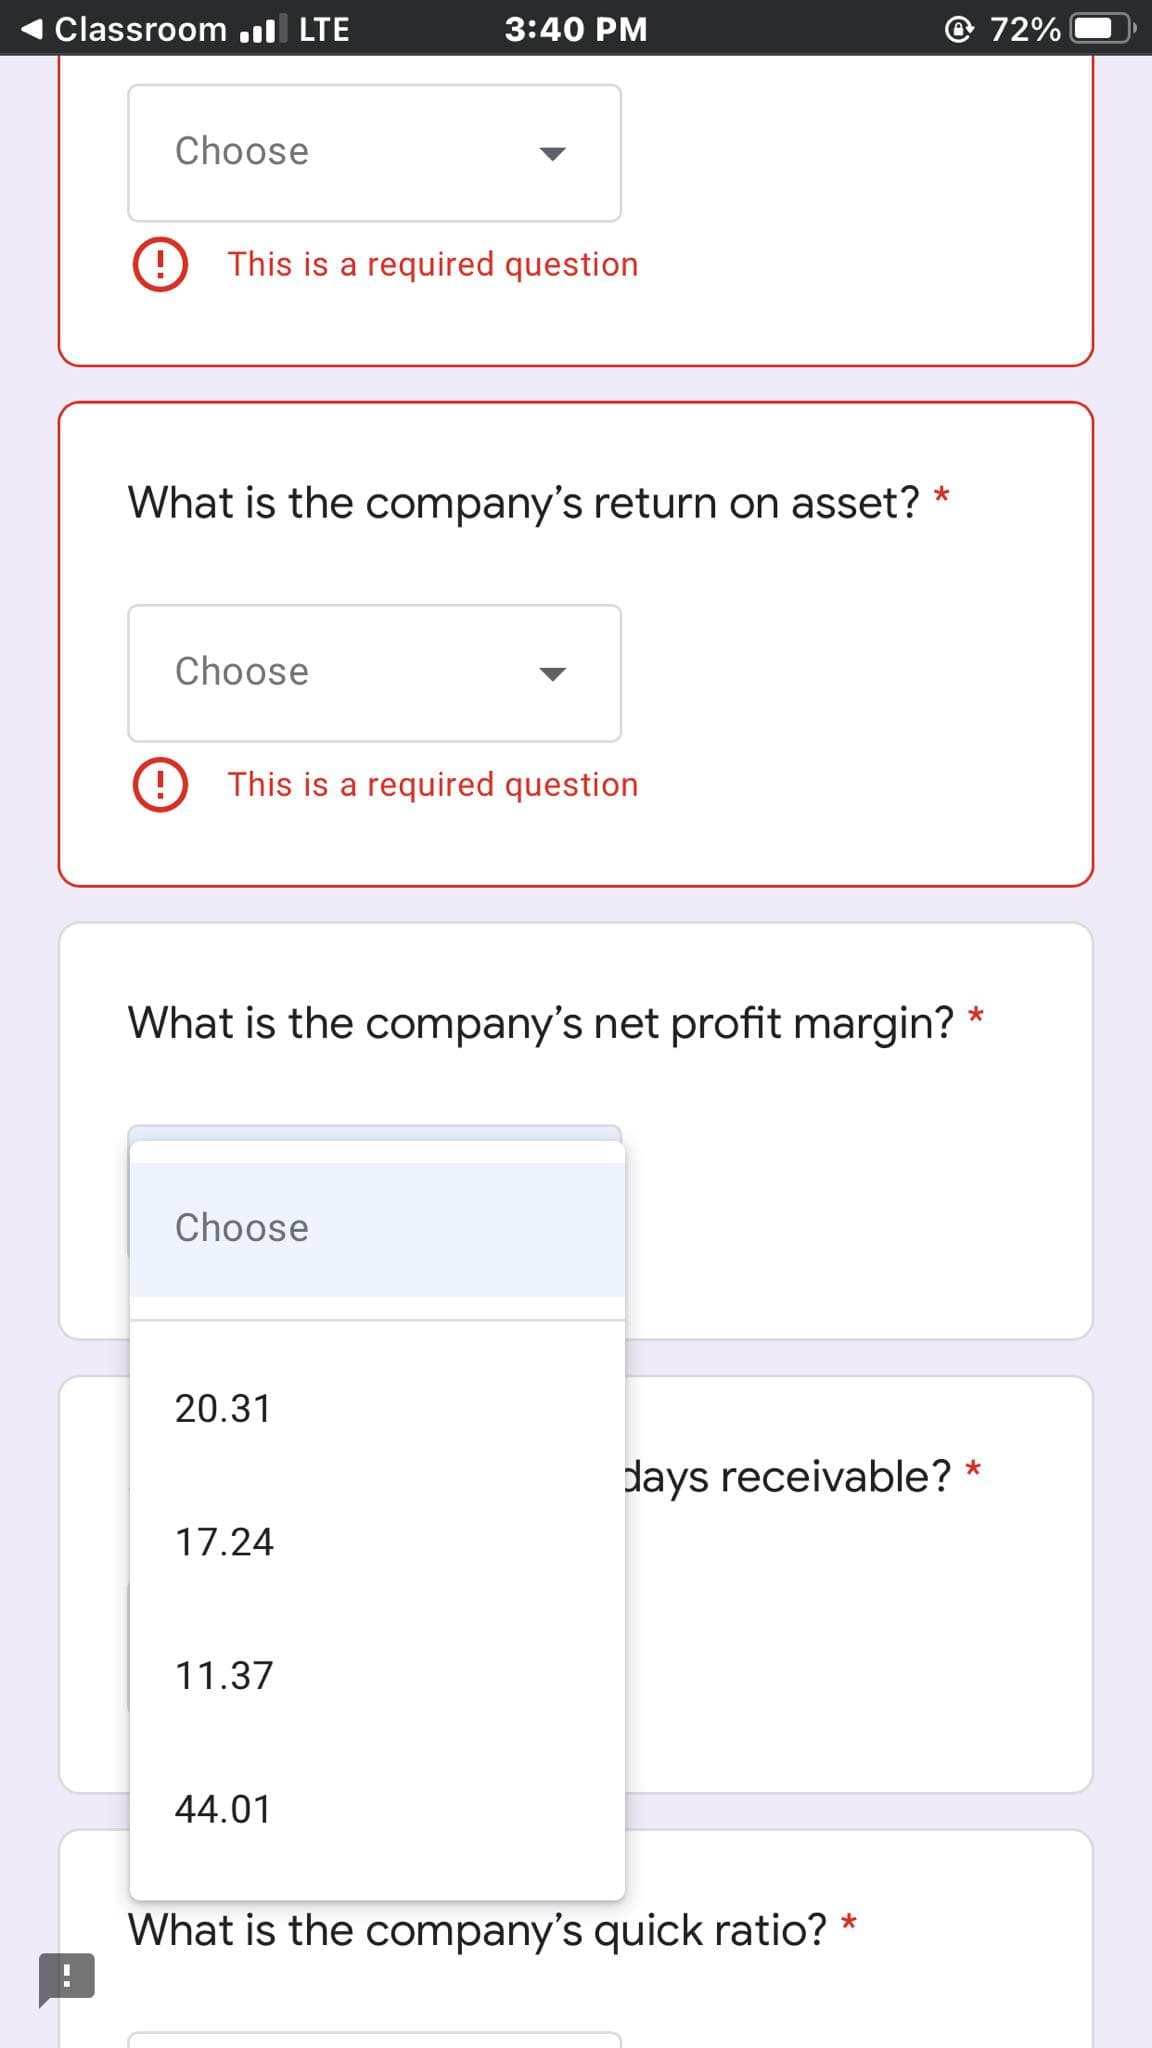 Classroom .ll LTE
3:40 PM
72%
Choose
This is a required question
What is the company's return on asset? *
Choose
This is a required question
What is the company's net profit margin? *
Choose
20.31
days receivable? *
17.24
11.37
44.01
What is the company's quick ratio? *
